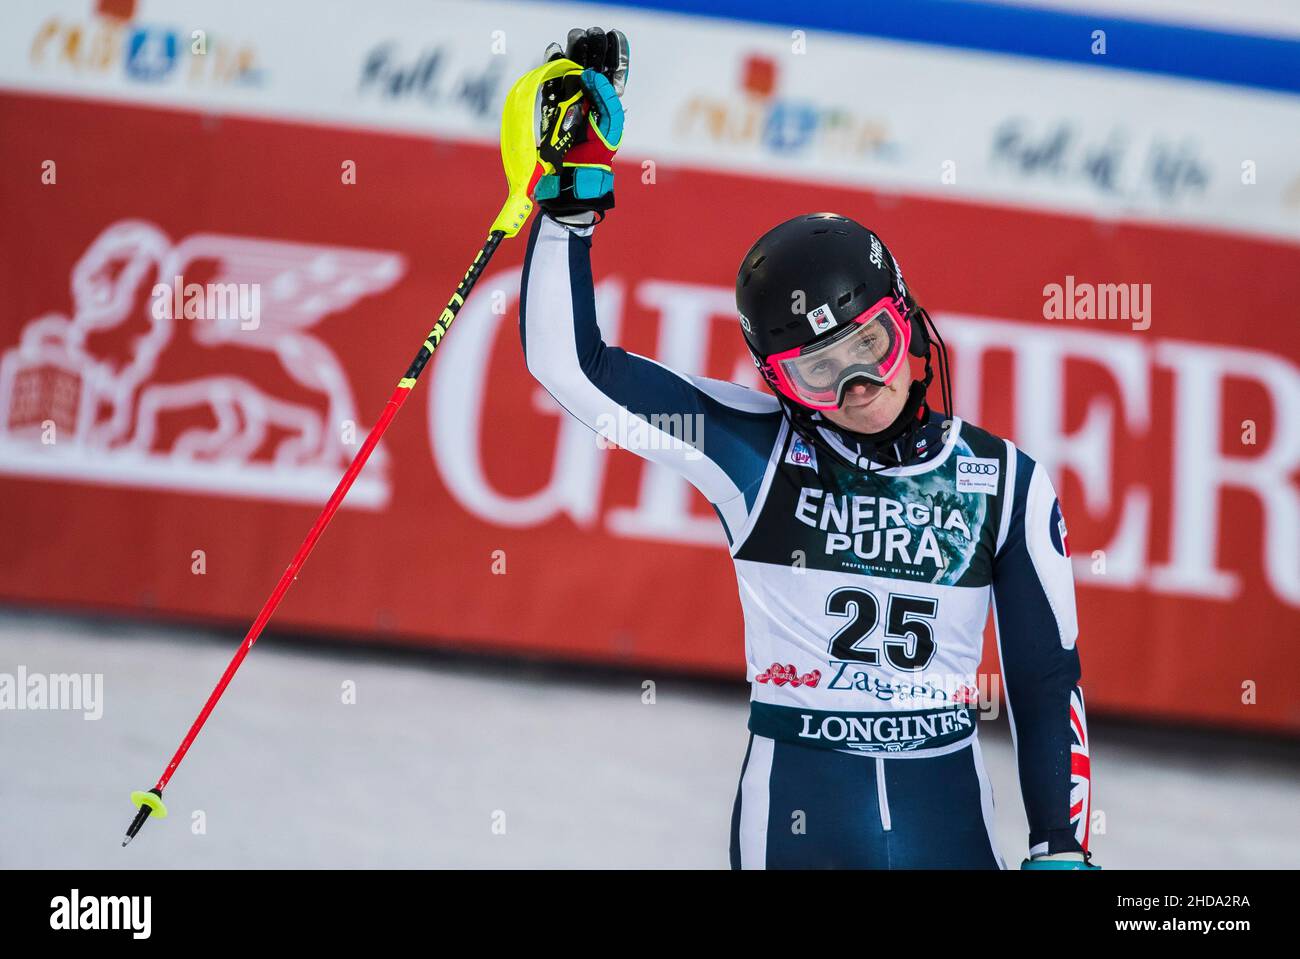 Zagreb, Croatia, 4th January 2022. Charlie Guest of Great Britain celebrates after the second race during the Audi Fis Ski World Cup Snow Queen Trophy - Women's Slalom in Zagreb. Januray 04, 2022. Credit: Nikola Krstic/Alamy Stock Photo